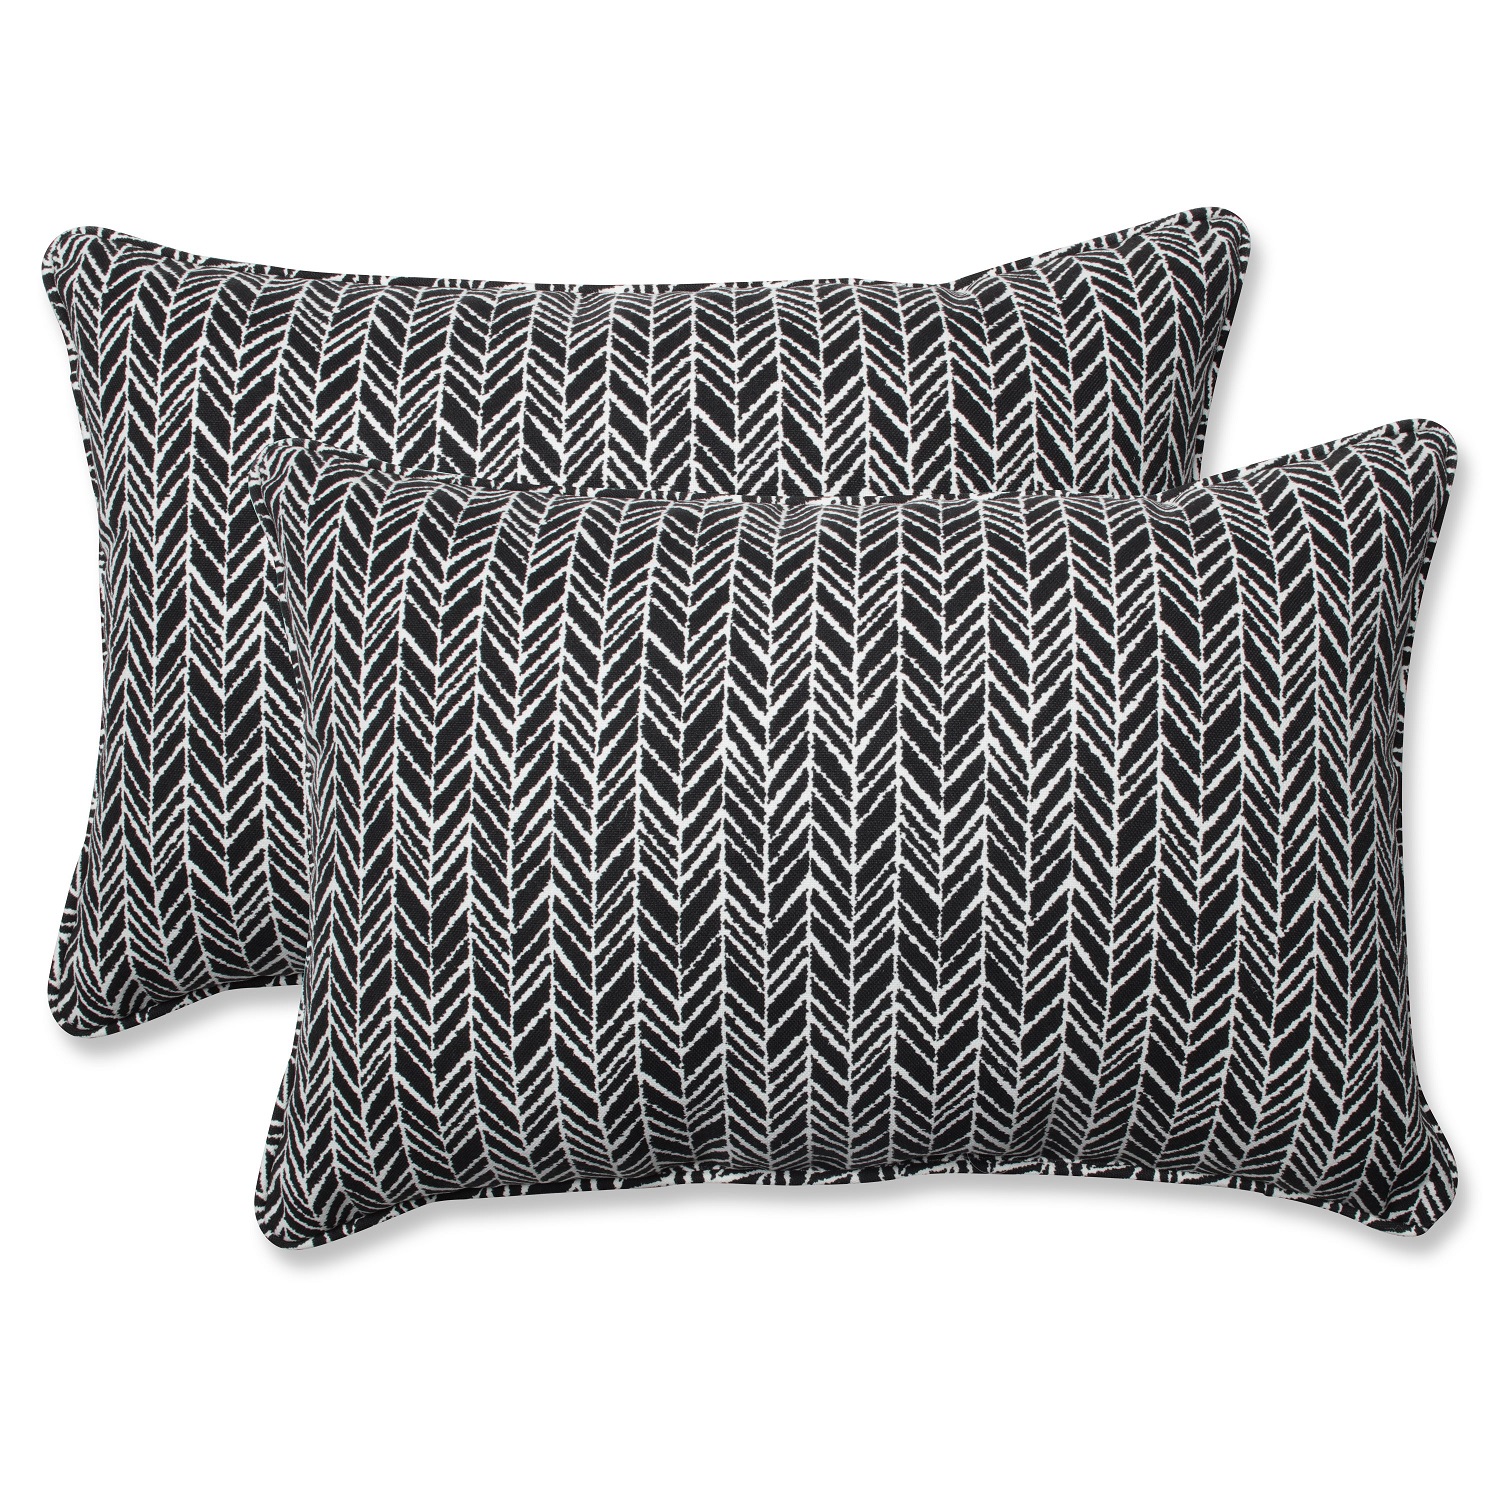 Pillow Perfect Set of 2 Black and Pearly White Corded Throw Pillows 24.5”